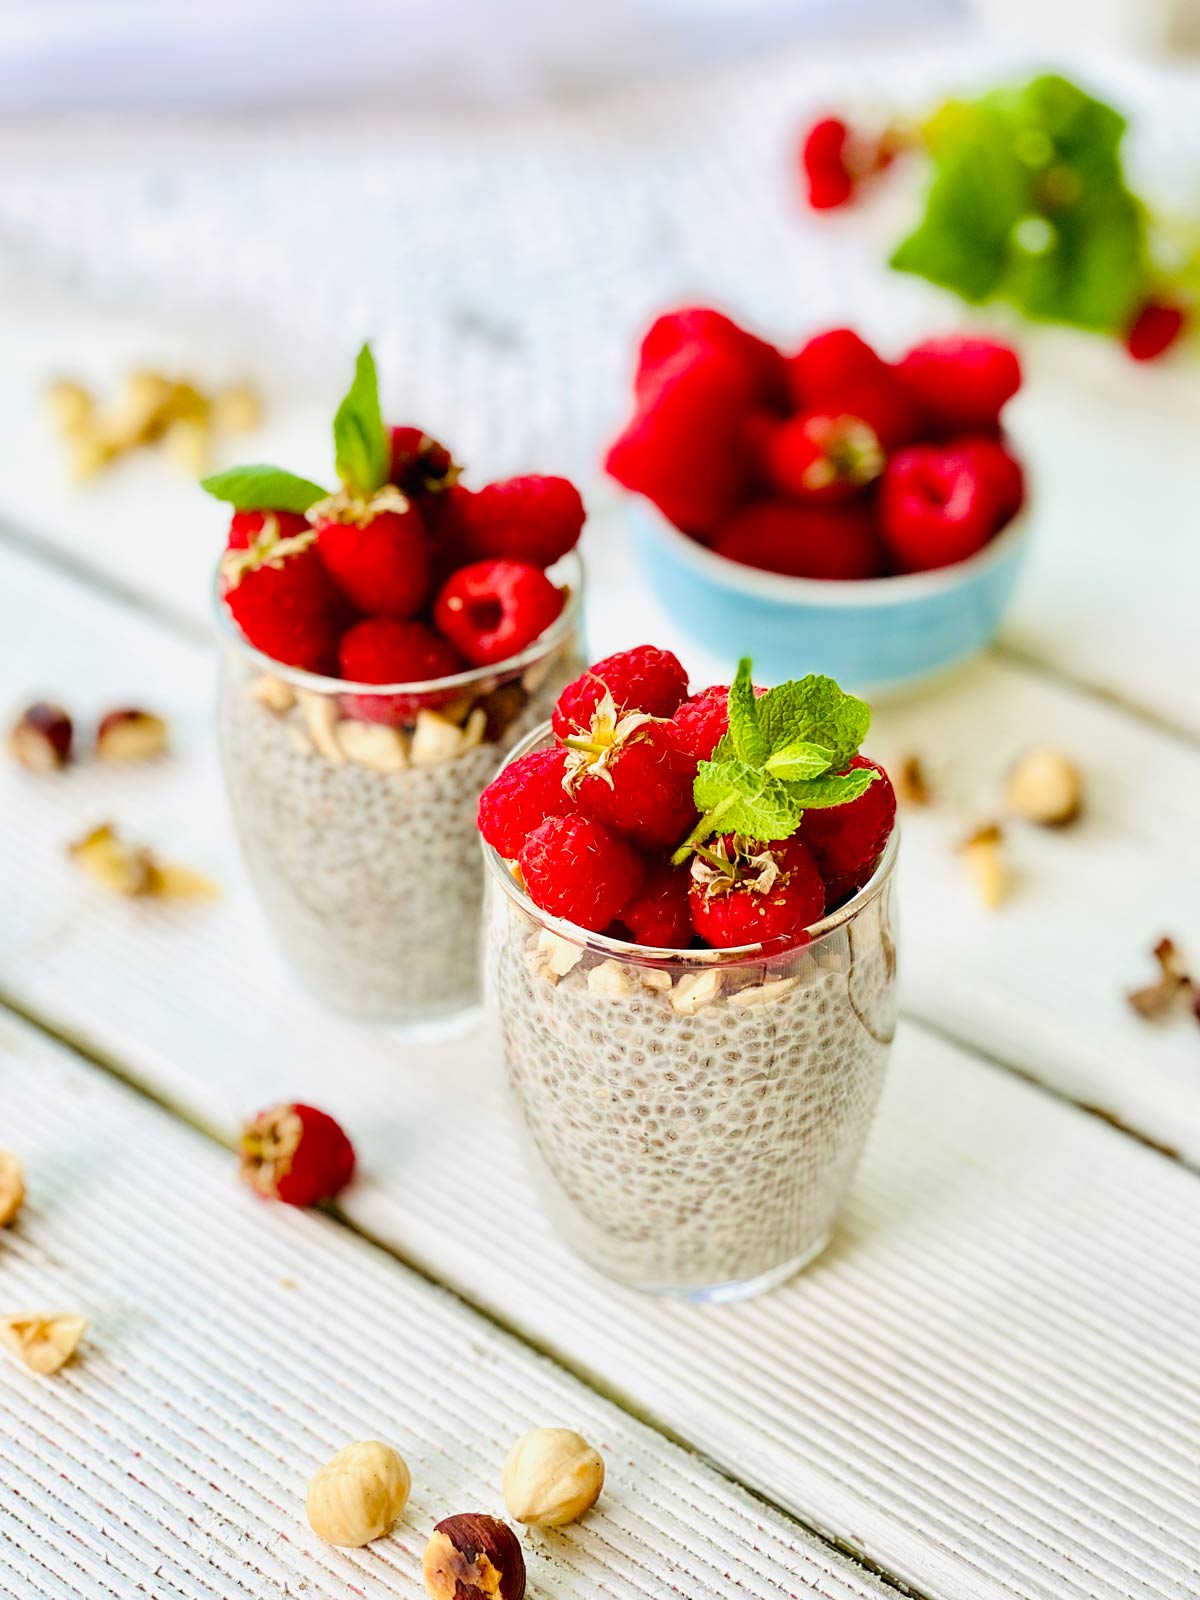 Chia pudding with nuts and raspberries in a glass